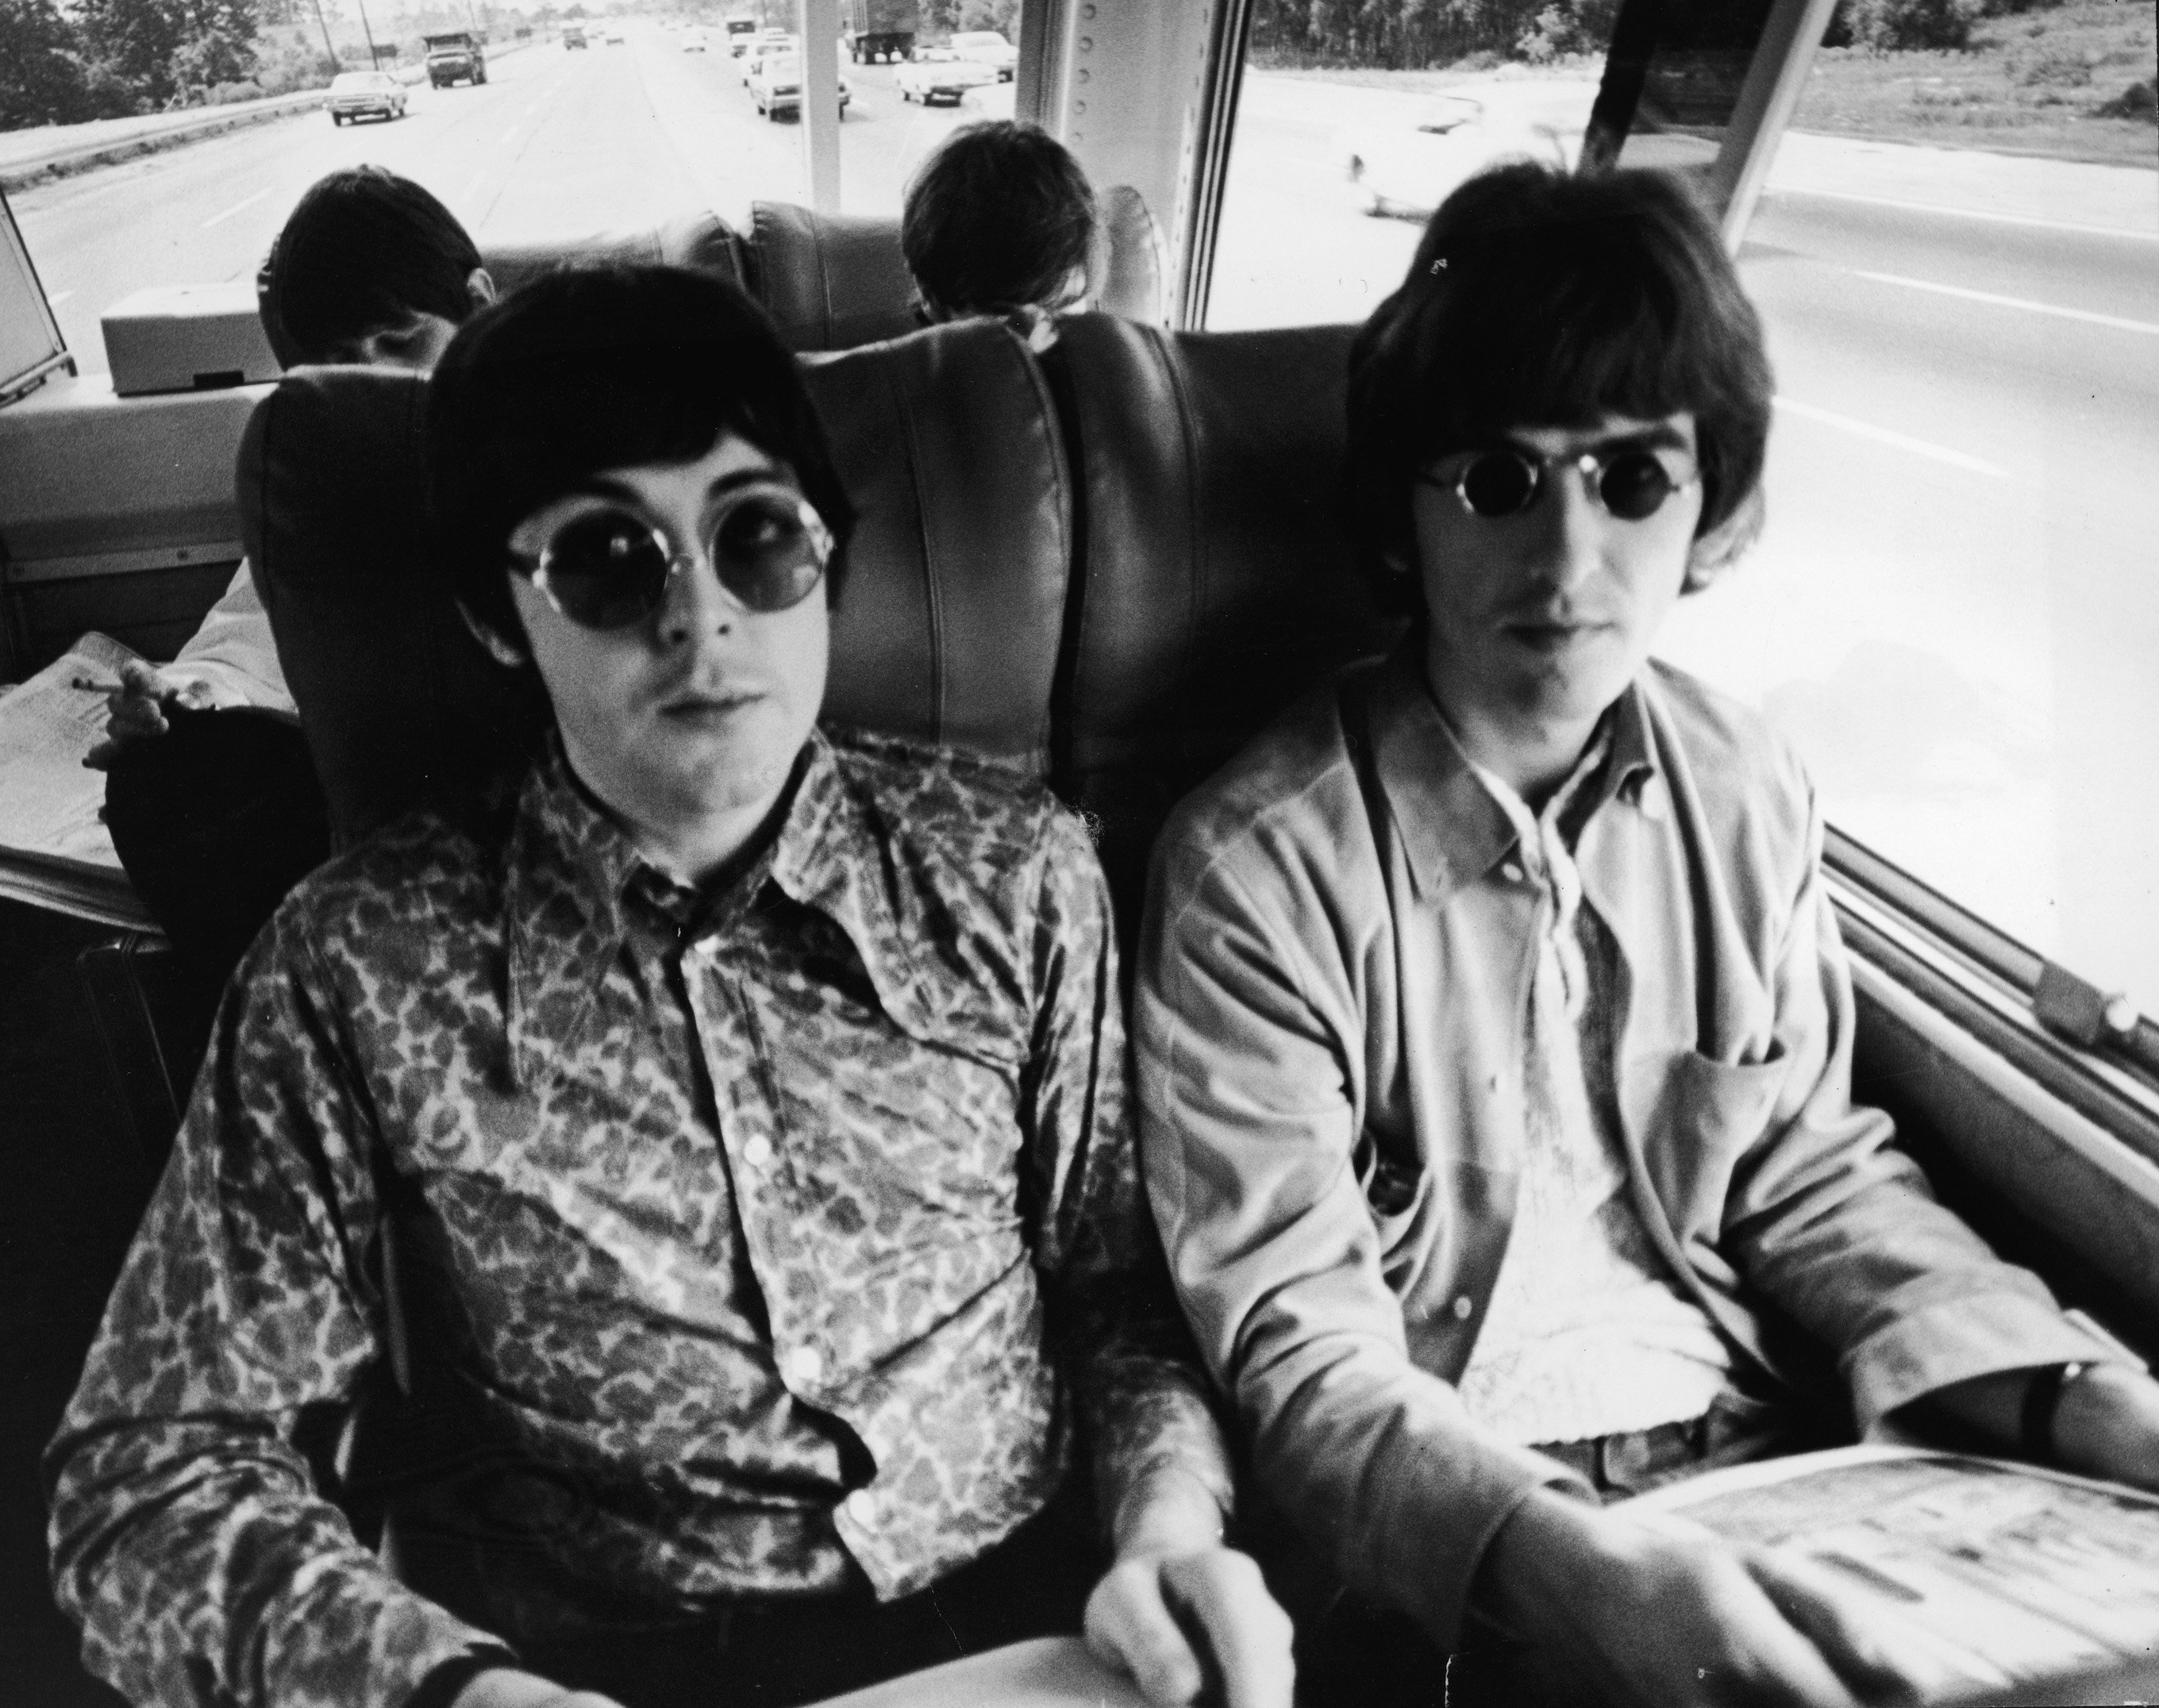 Paul McCartney and George Harrison sit next to each other on their tour bus during a Beatles American tour